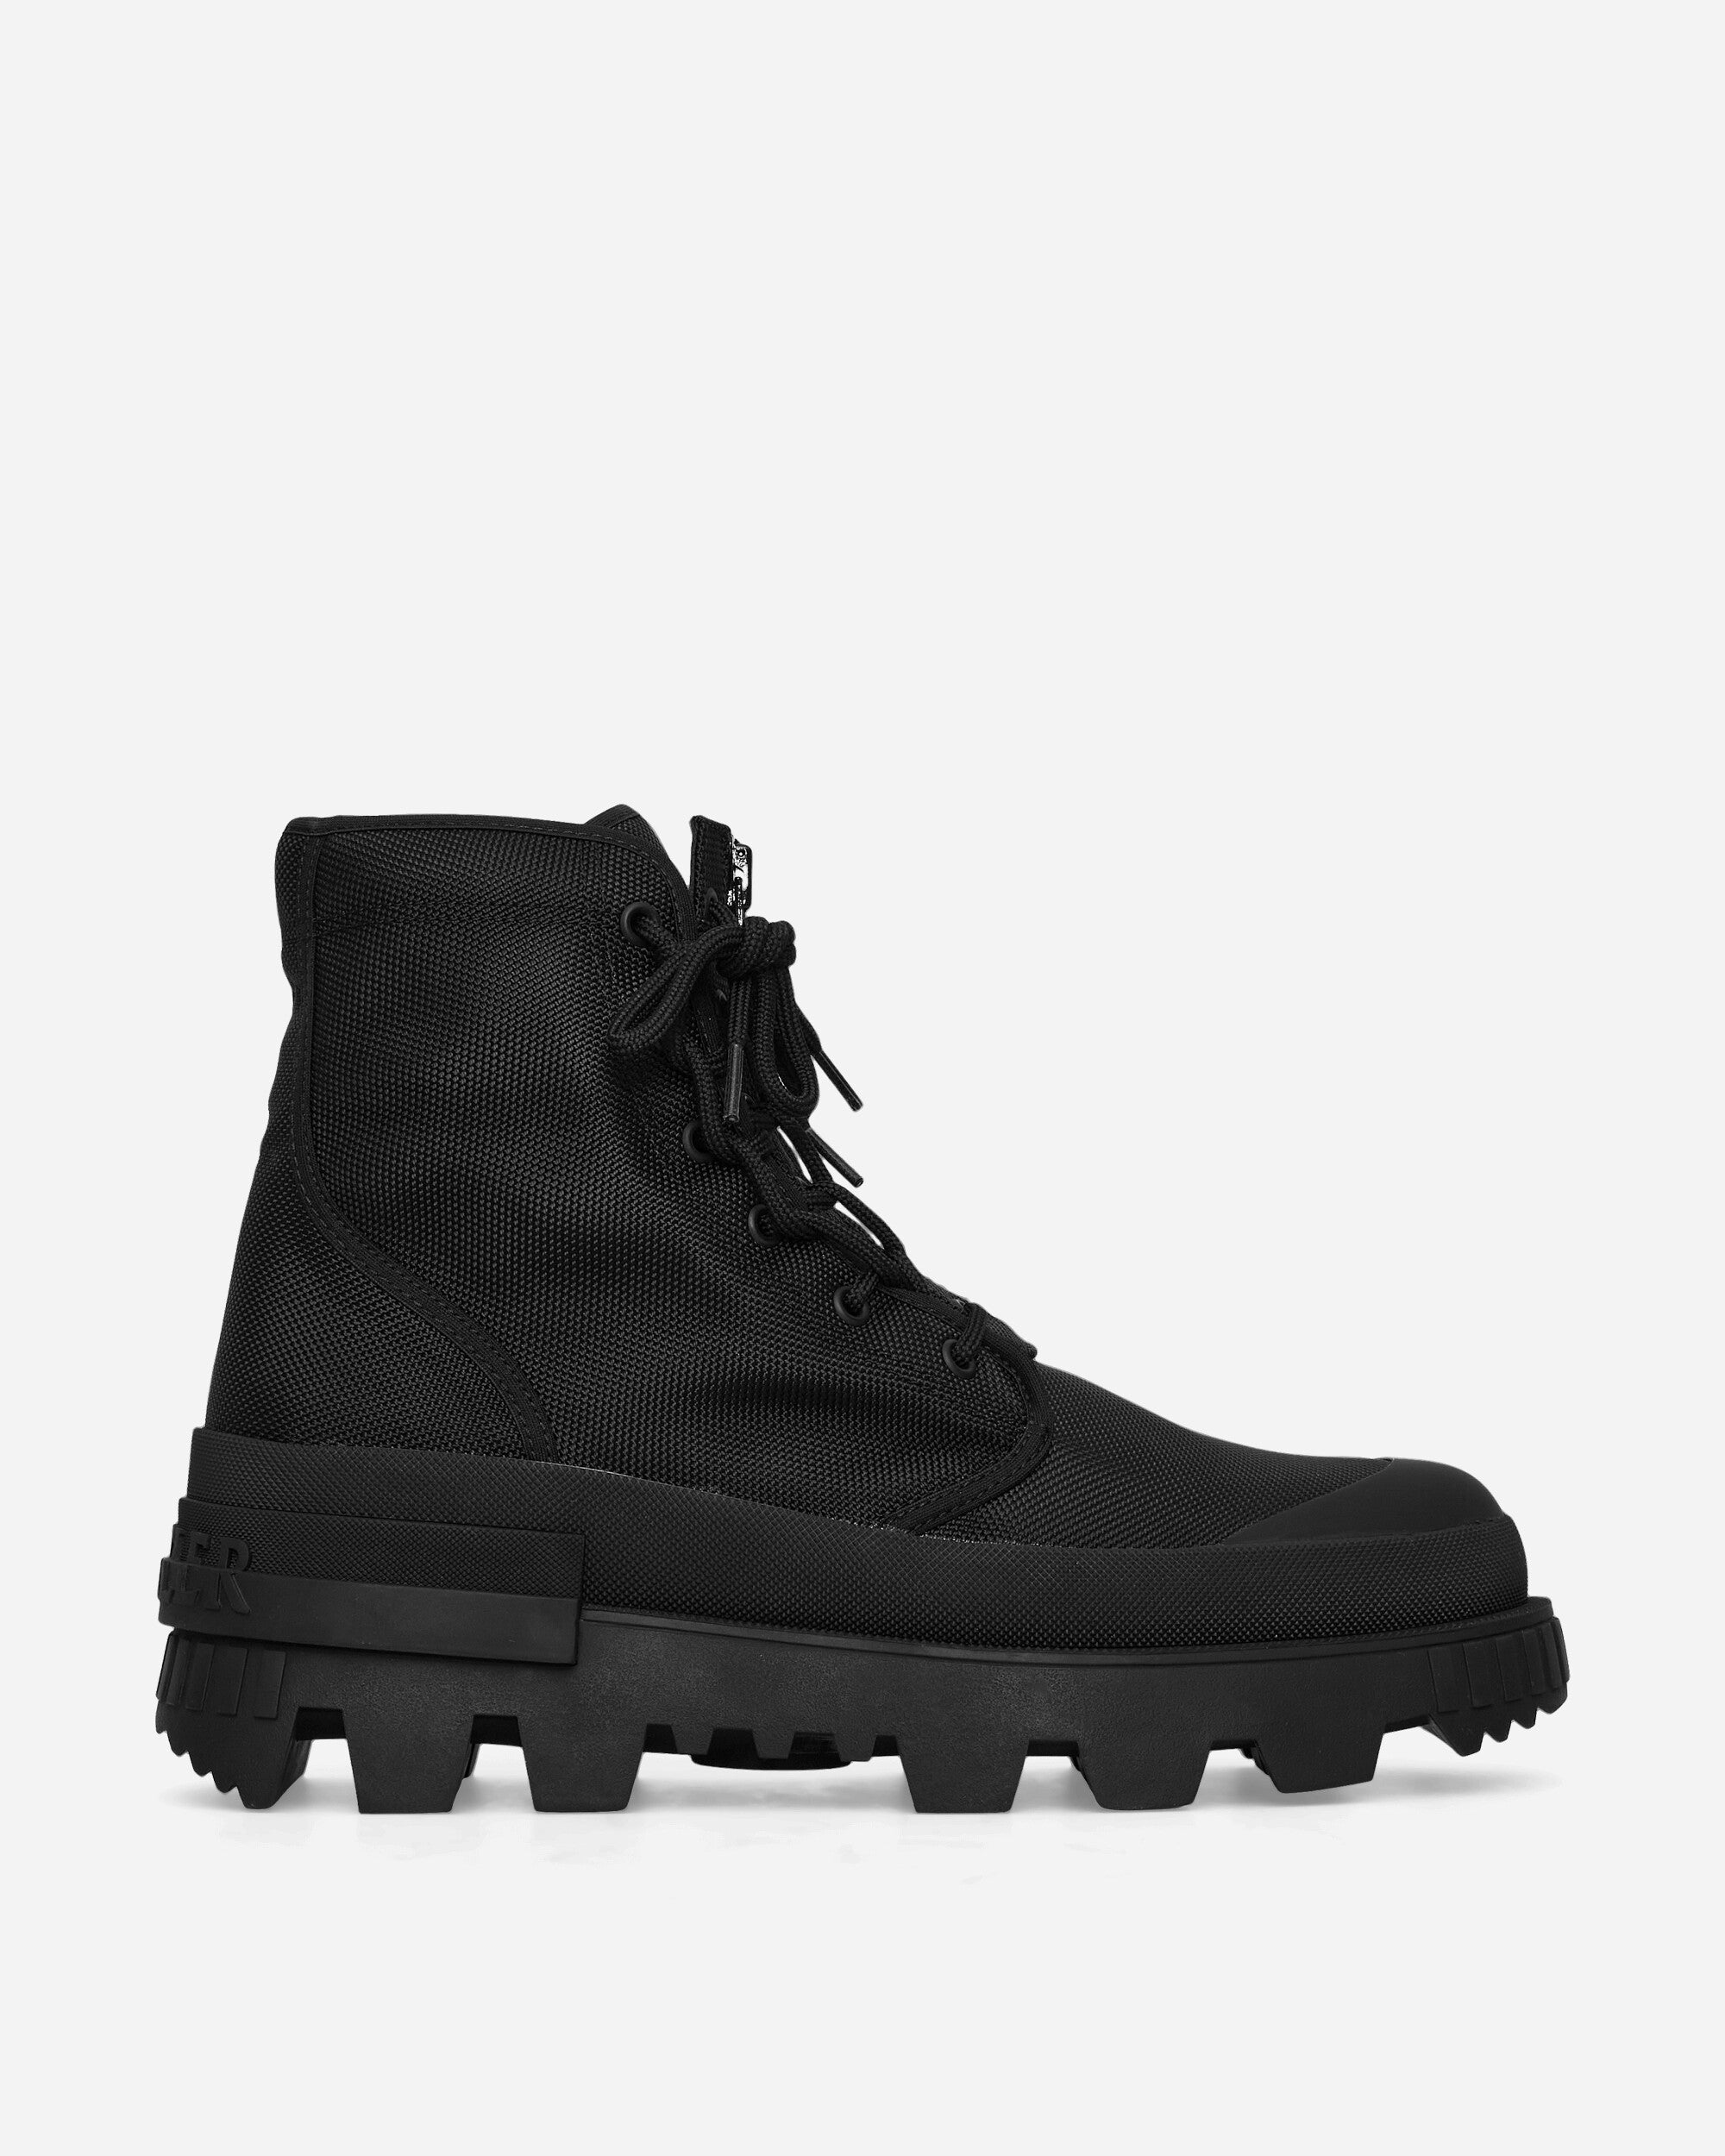 Moncler Genius 4 Moncler Hyke Hyke Desertyx Ankle Boots Black Boots Hiking 4F00010M2541 999